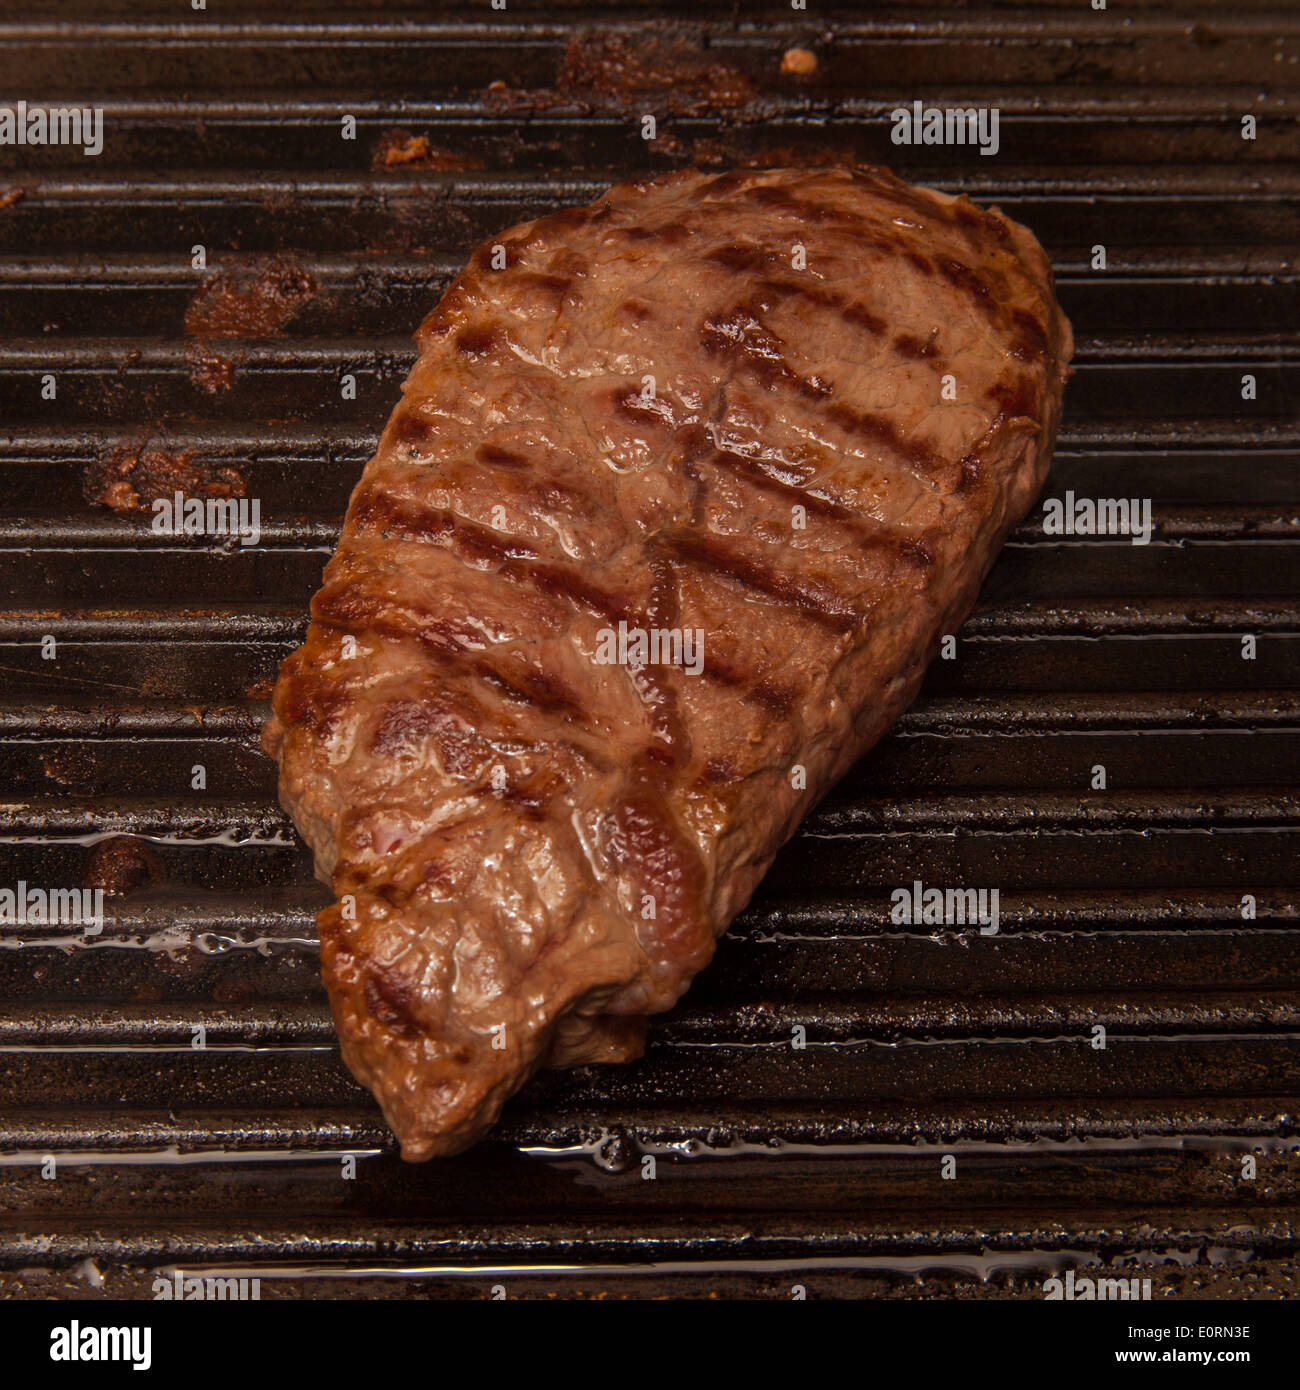 Horse meat steak cooking on a griddle. Stock Photo